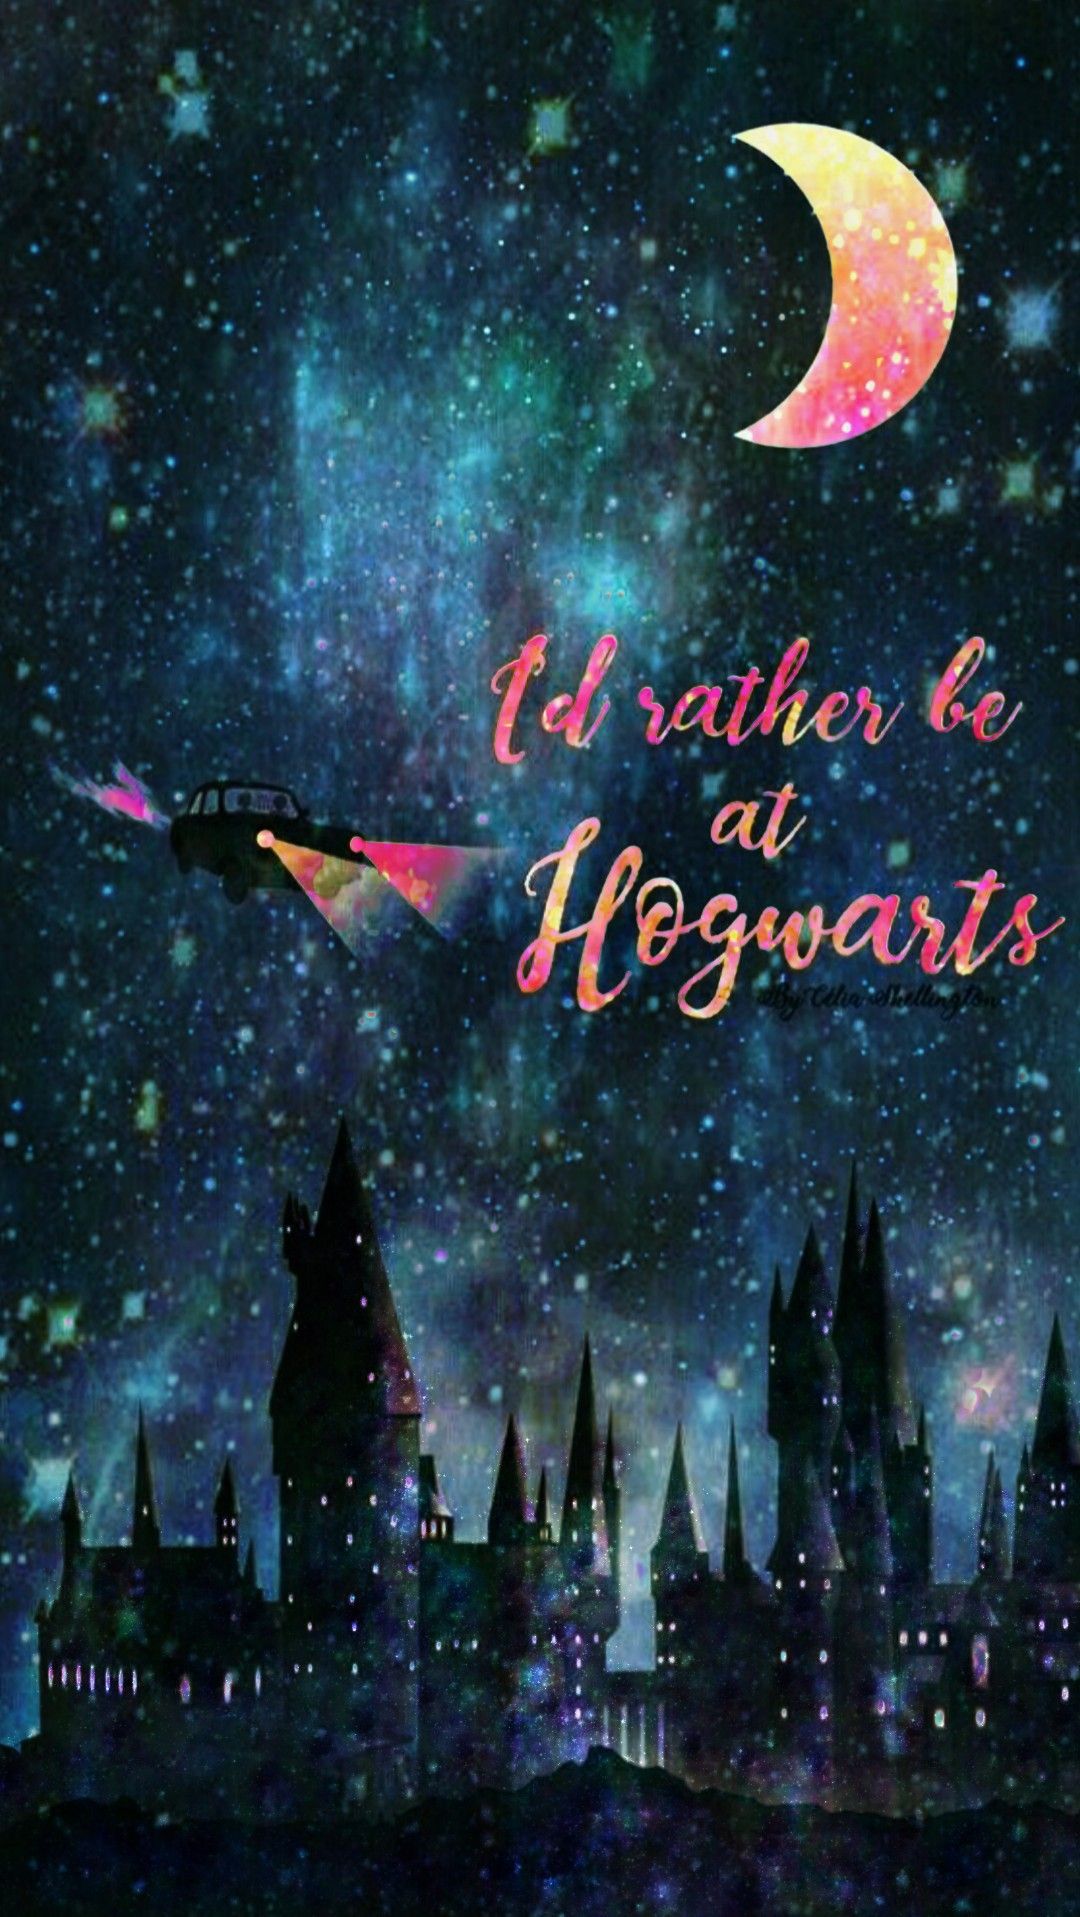 Hogwarts Night, made by me #galaxy #glitter #sparkles #wallpaper # background #nigh. Harry potter iphone wallpaper, Harry potter drawings, Harry potter wallpaper